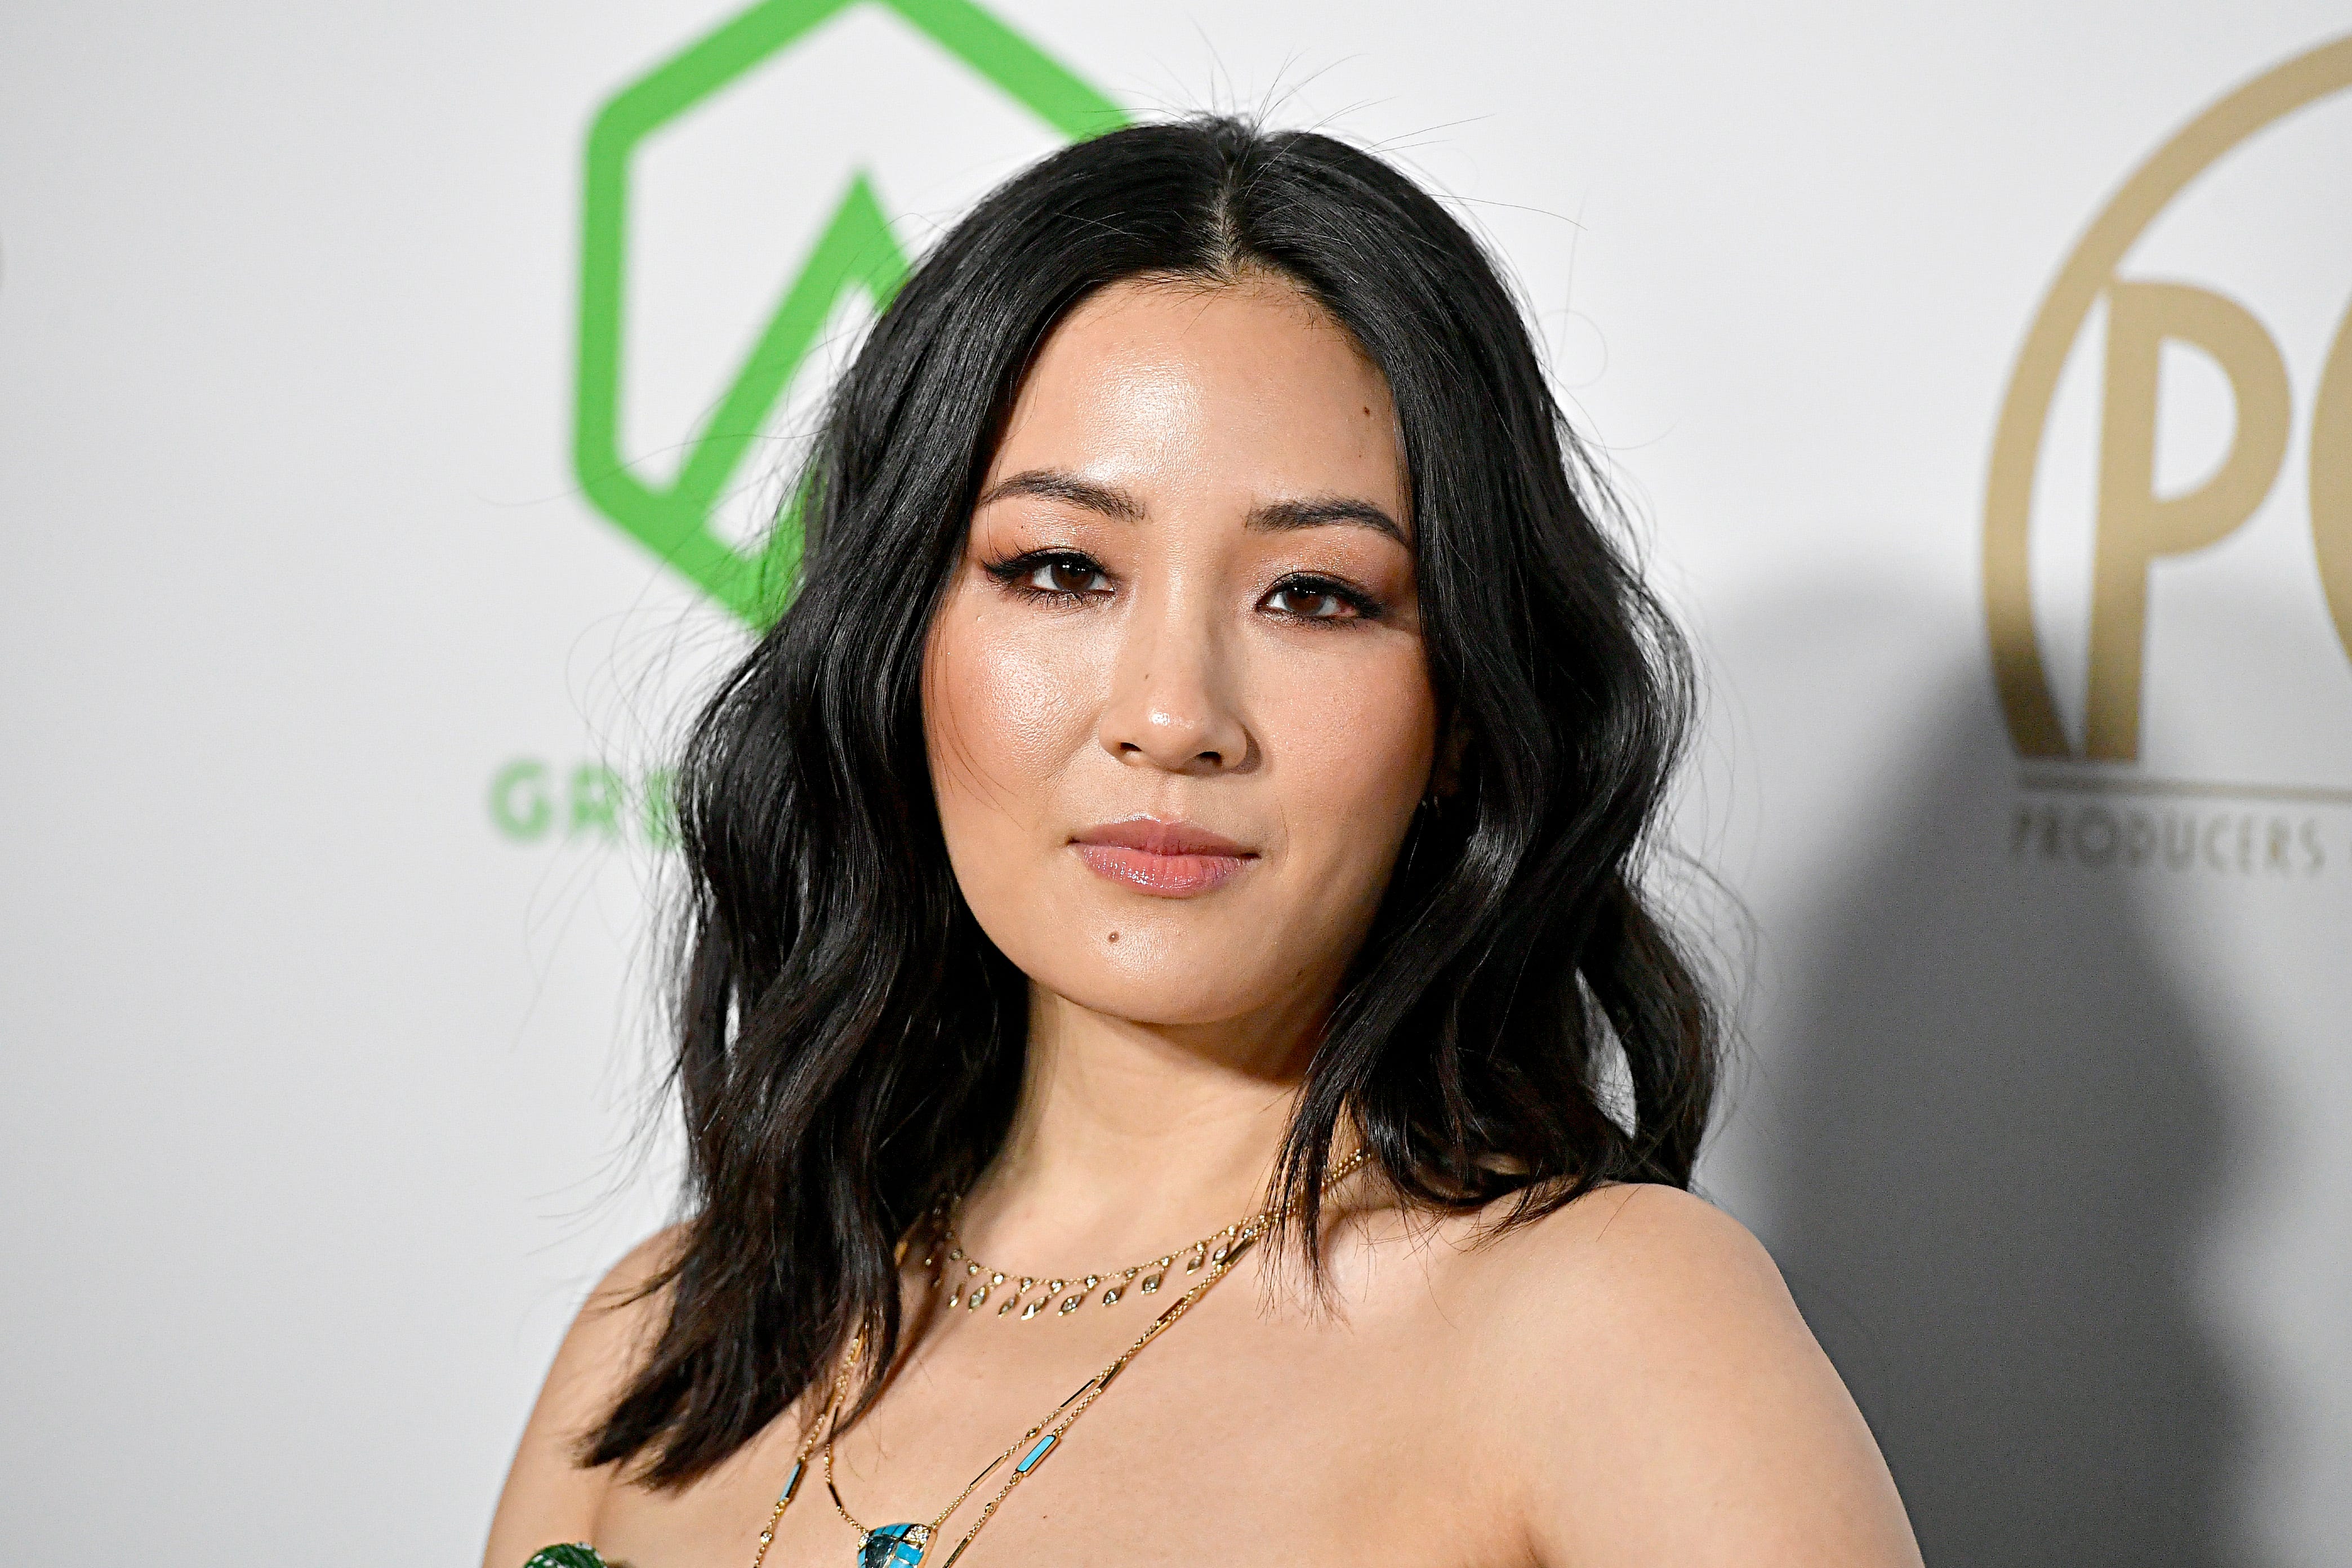 Did Constance Wu Attempt Suicide: Why? Death Hoax Debunked - What Happened To American Actress?